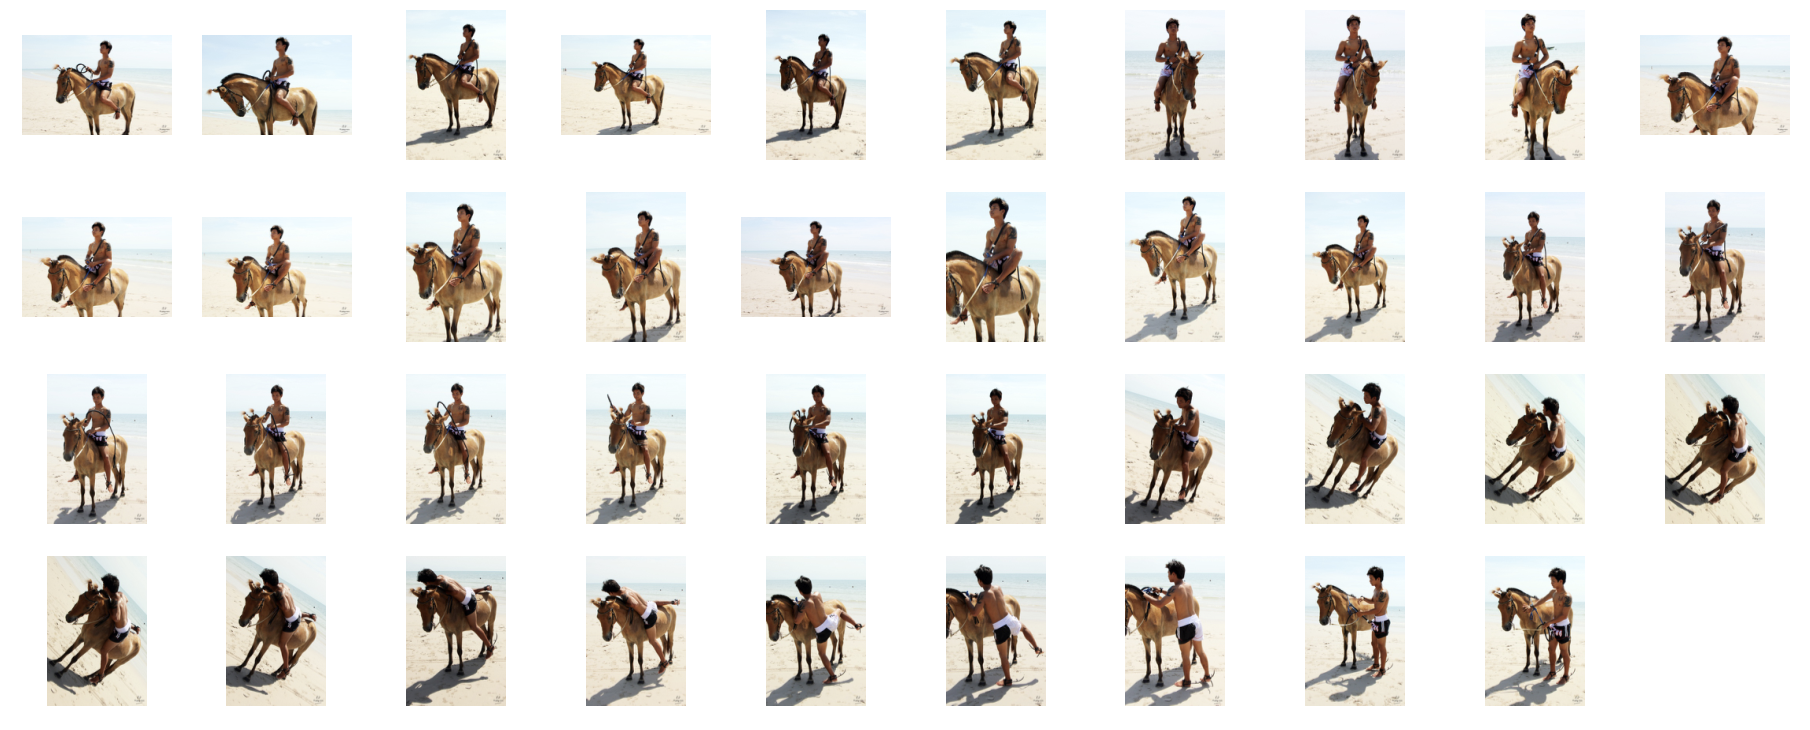 Savings package: David Entire Season 3 (449 pictures in 11 galleries) - Riding.Vision